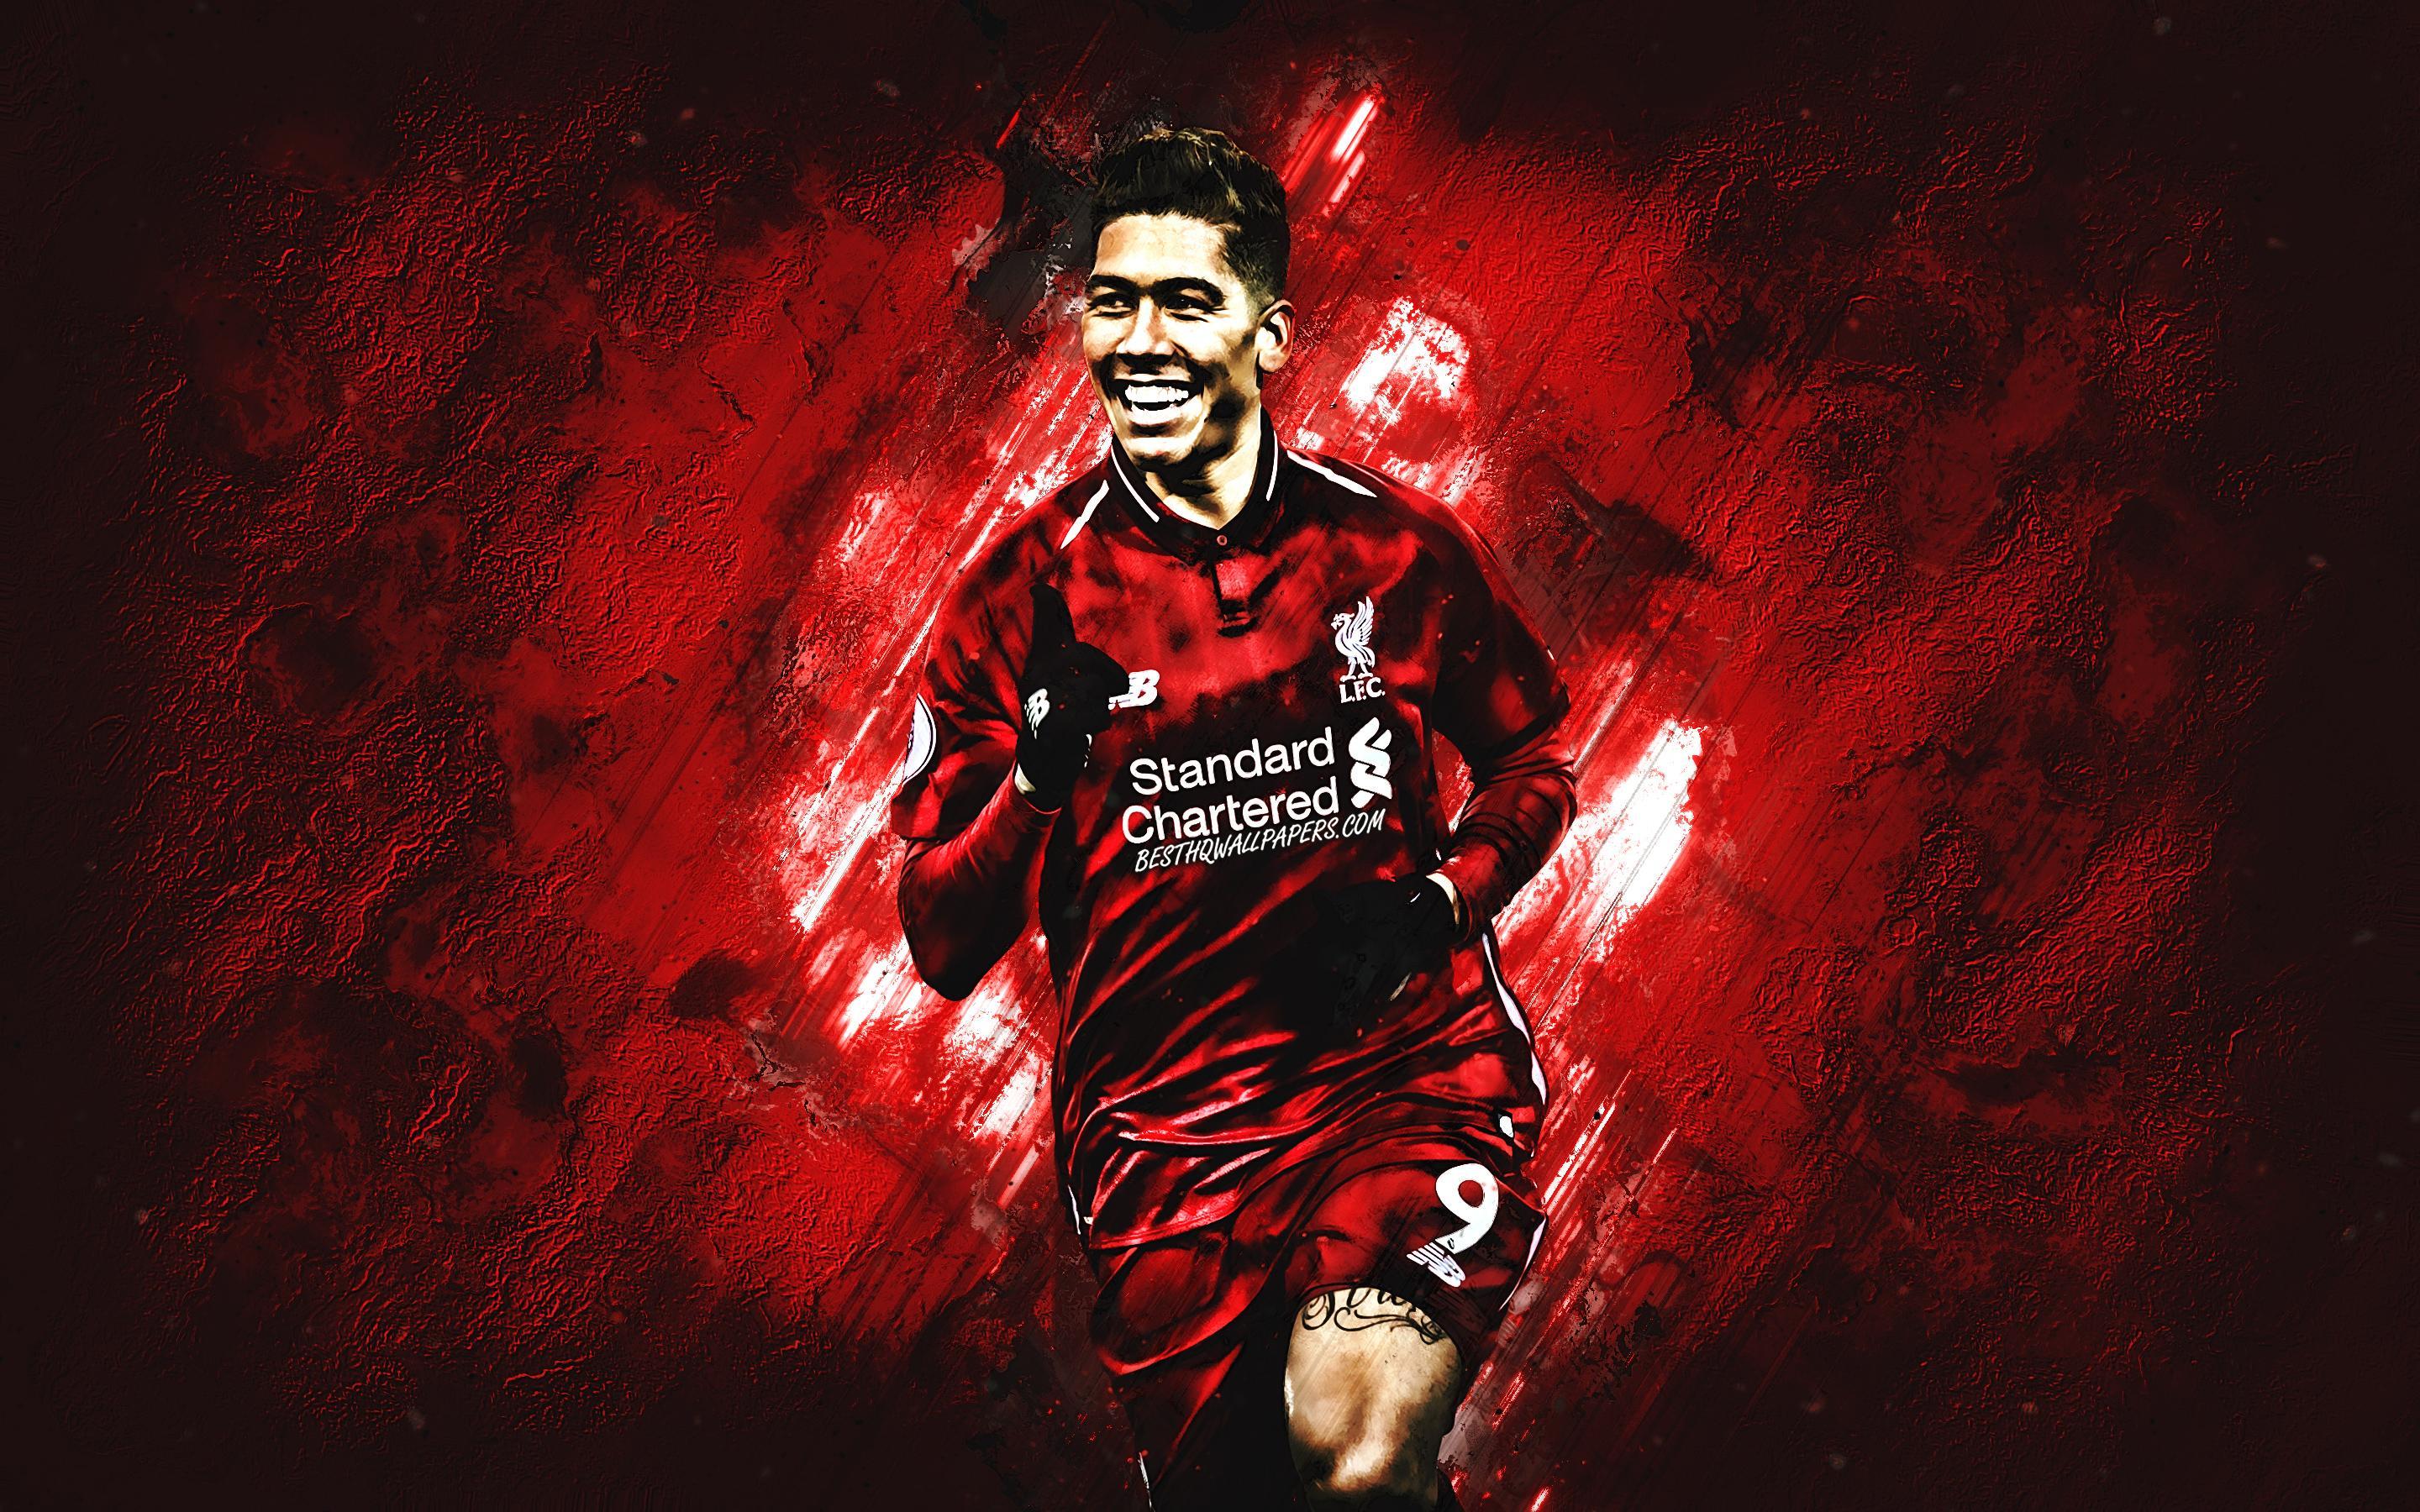 Download wallpaper Roberto Firmino, Liverpool FC, Brazilian footballer, attacking midfielder, Liverpool 2020 football players, red stone background for desktop with resolution 2880x1800. High Quality HD picture wallpaper